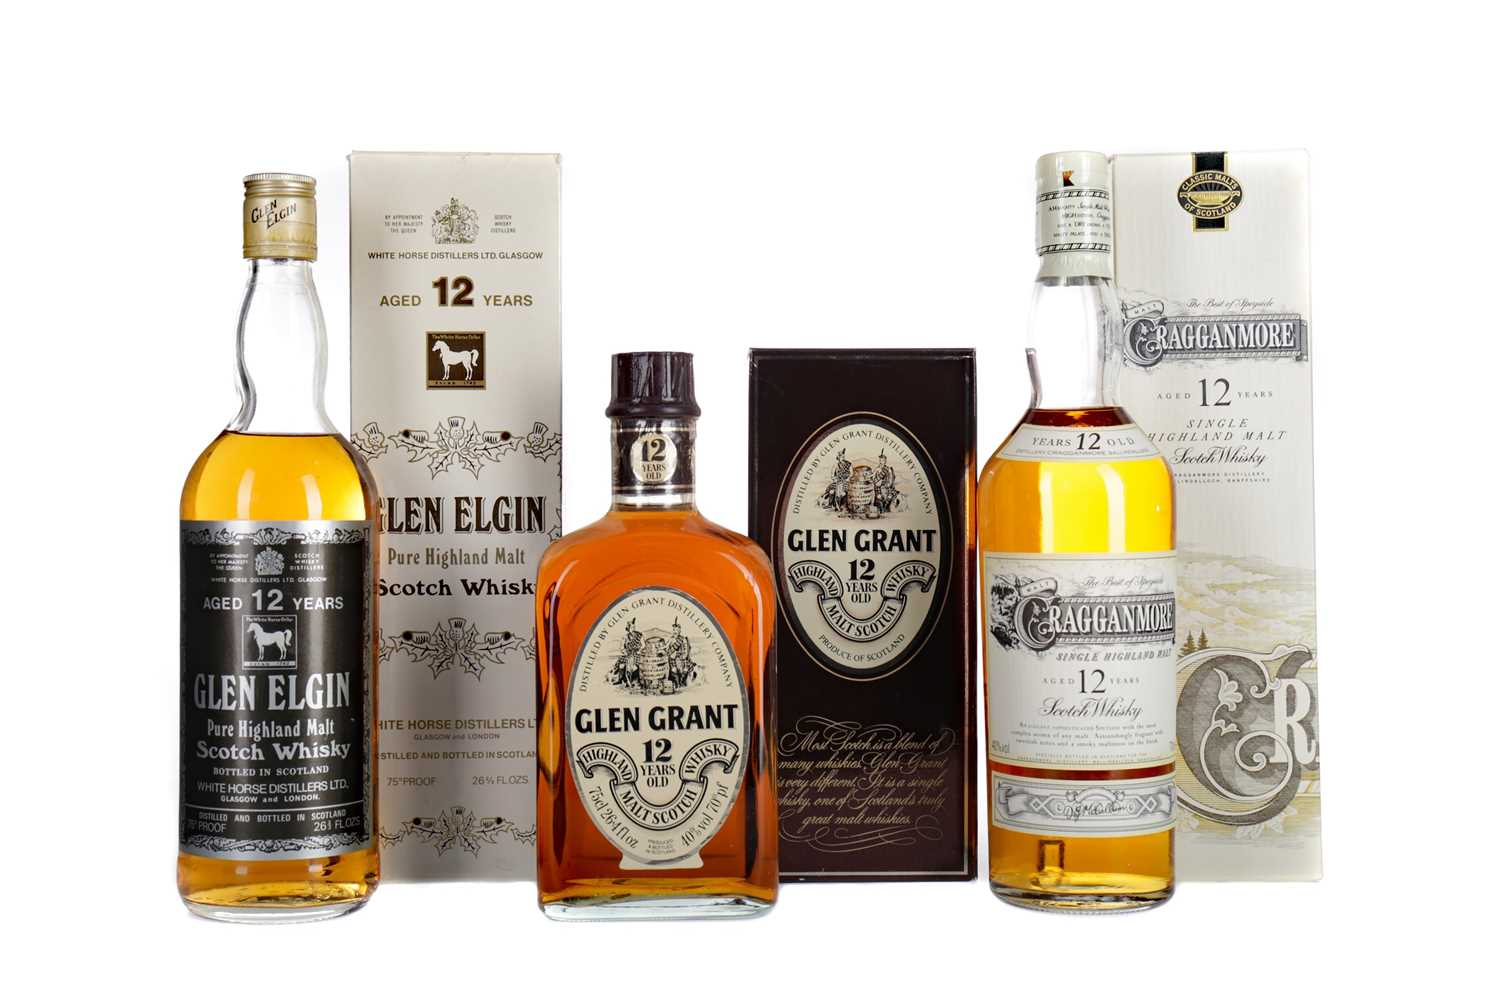 Lot 241 - GLEN GRANT 12 YEARS OLD, GLEN ELGIN AGED 12 YEARS AND CRAGGANMORE 12 YEARS OLD